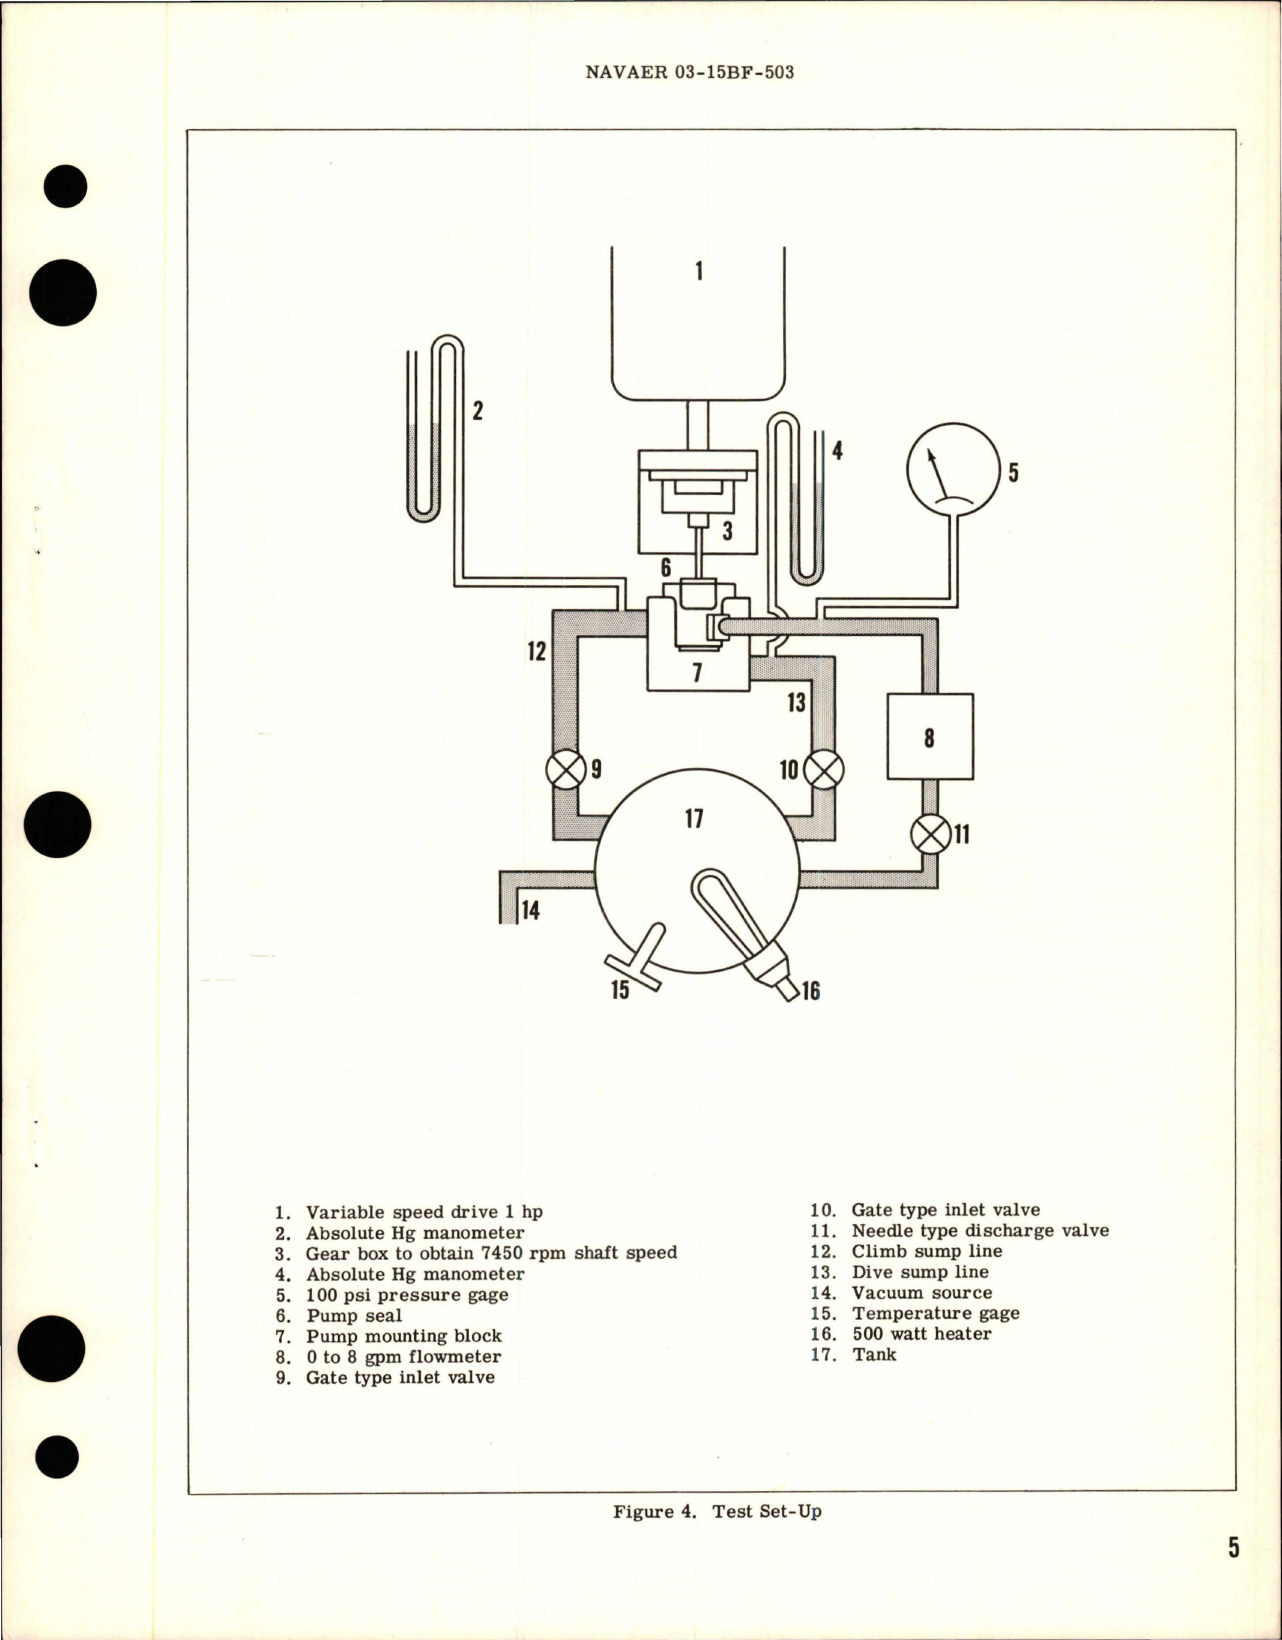 Sample page 5 from AirCorps Library document: Overhaul Instructions with Parts for Two Element Oil Scavenge Pump - Model RG10500 C1